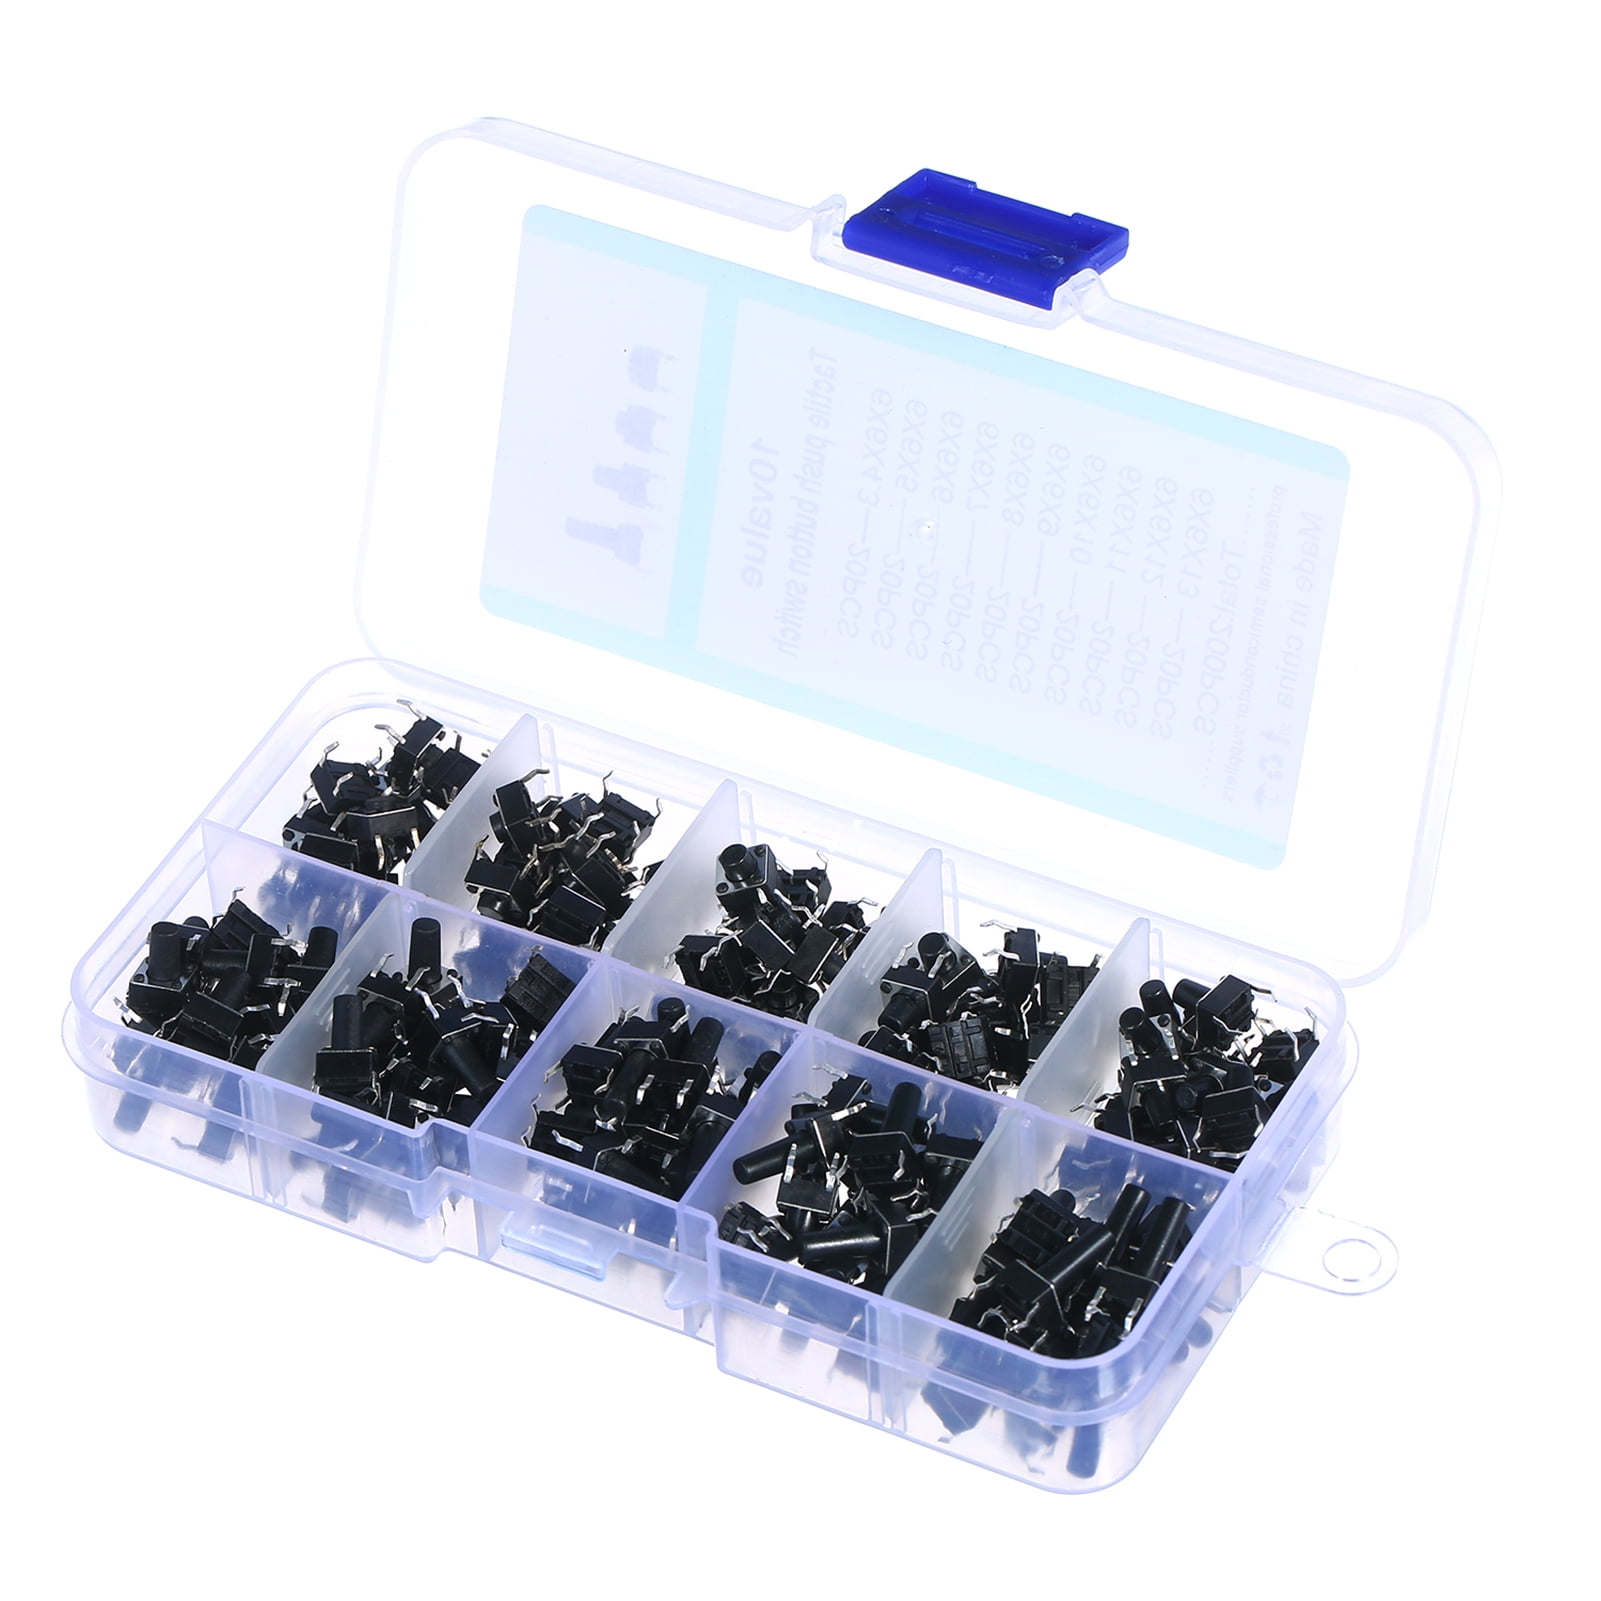 200PCS Tactile Micro Momentary Push Button Switch 10 Value Tact Assortment 